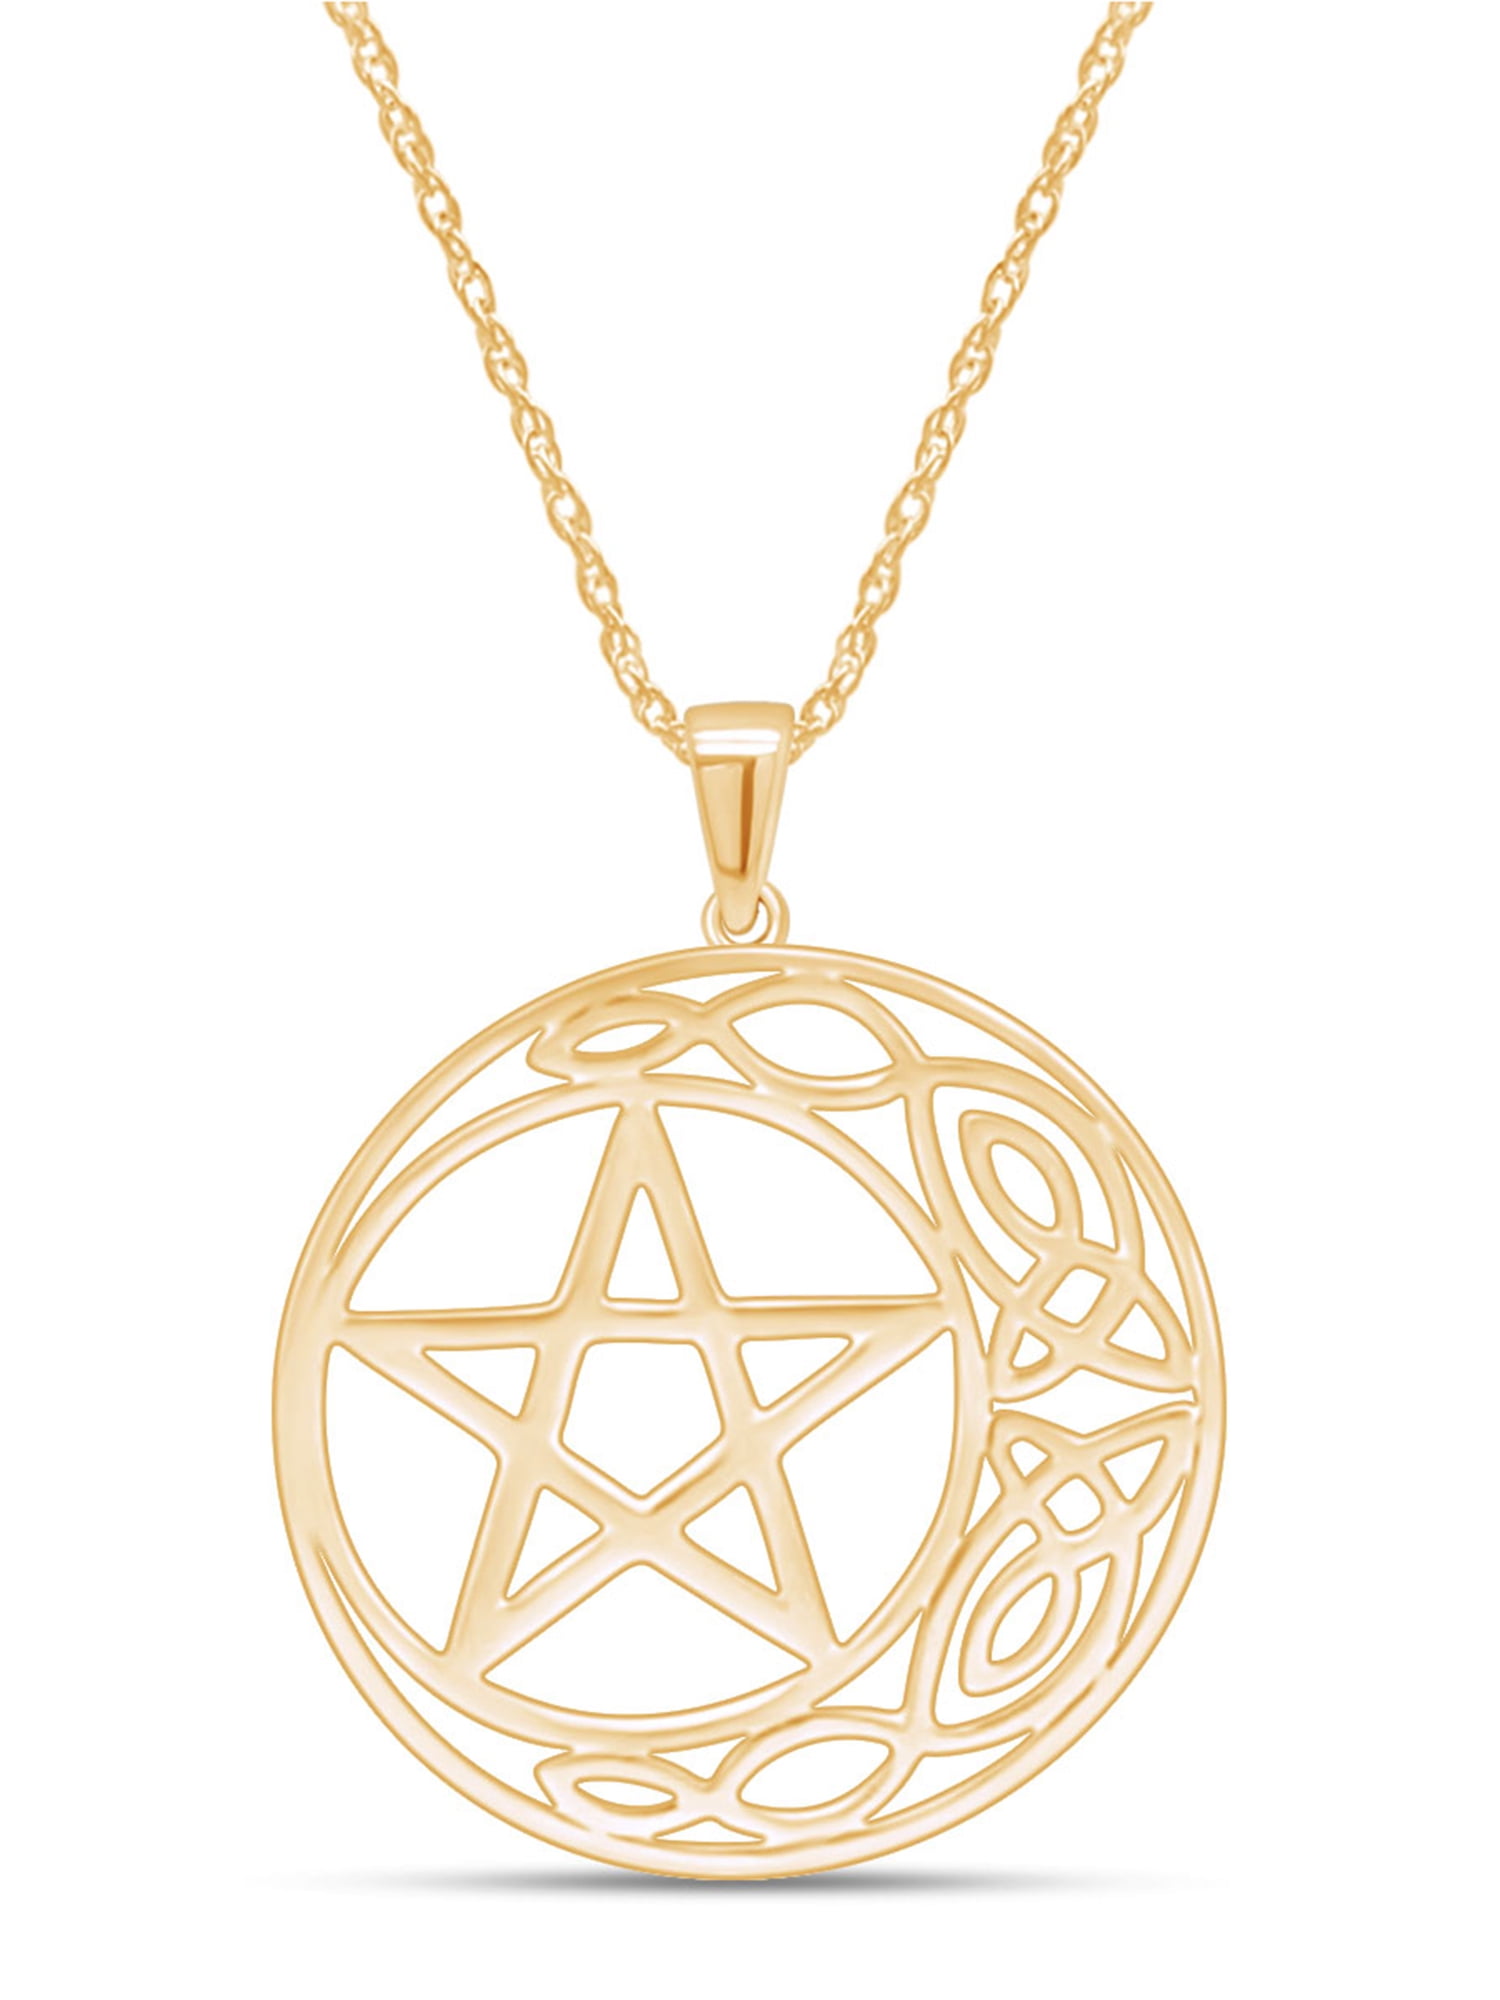 AFFY Personalize Engravable Double Circle Pendant Necklace in 14k Gold Over Sterling Silver